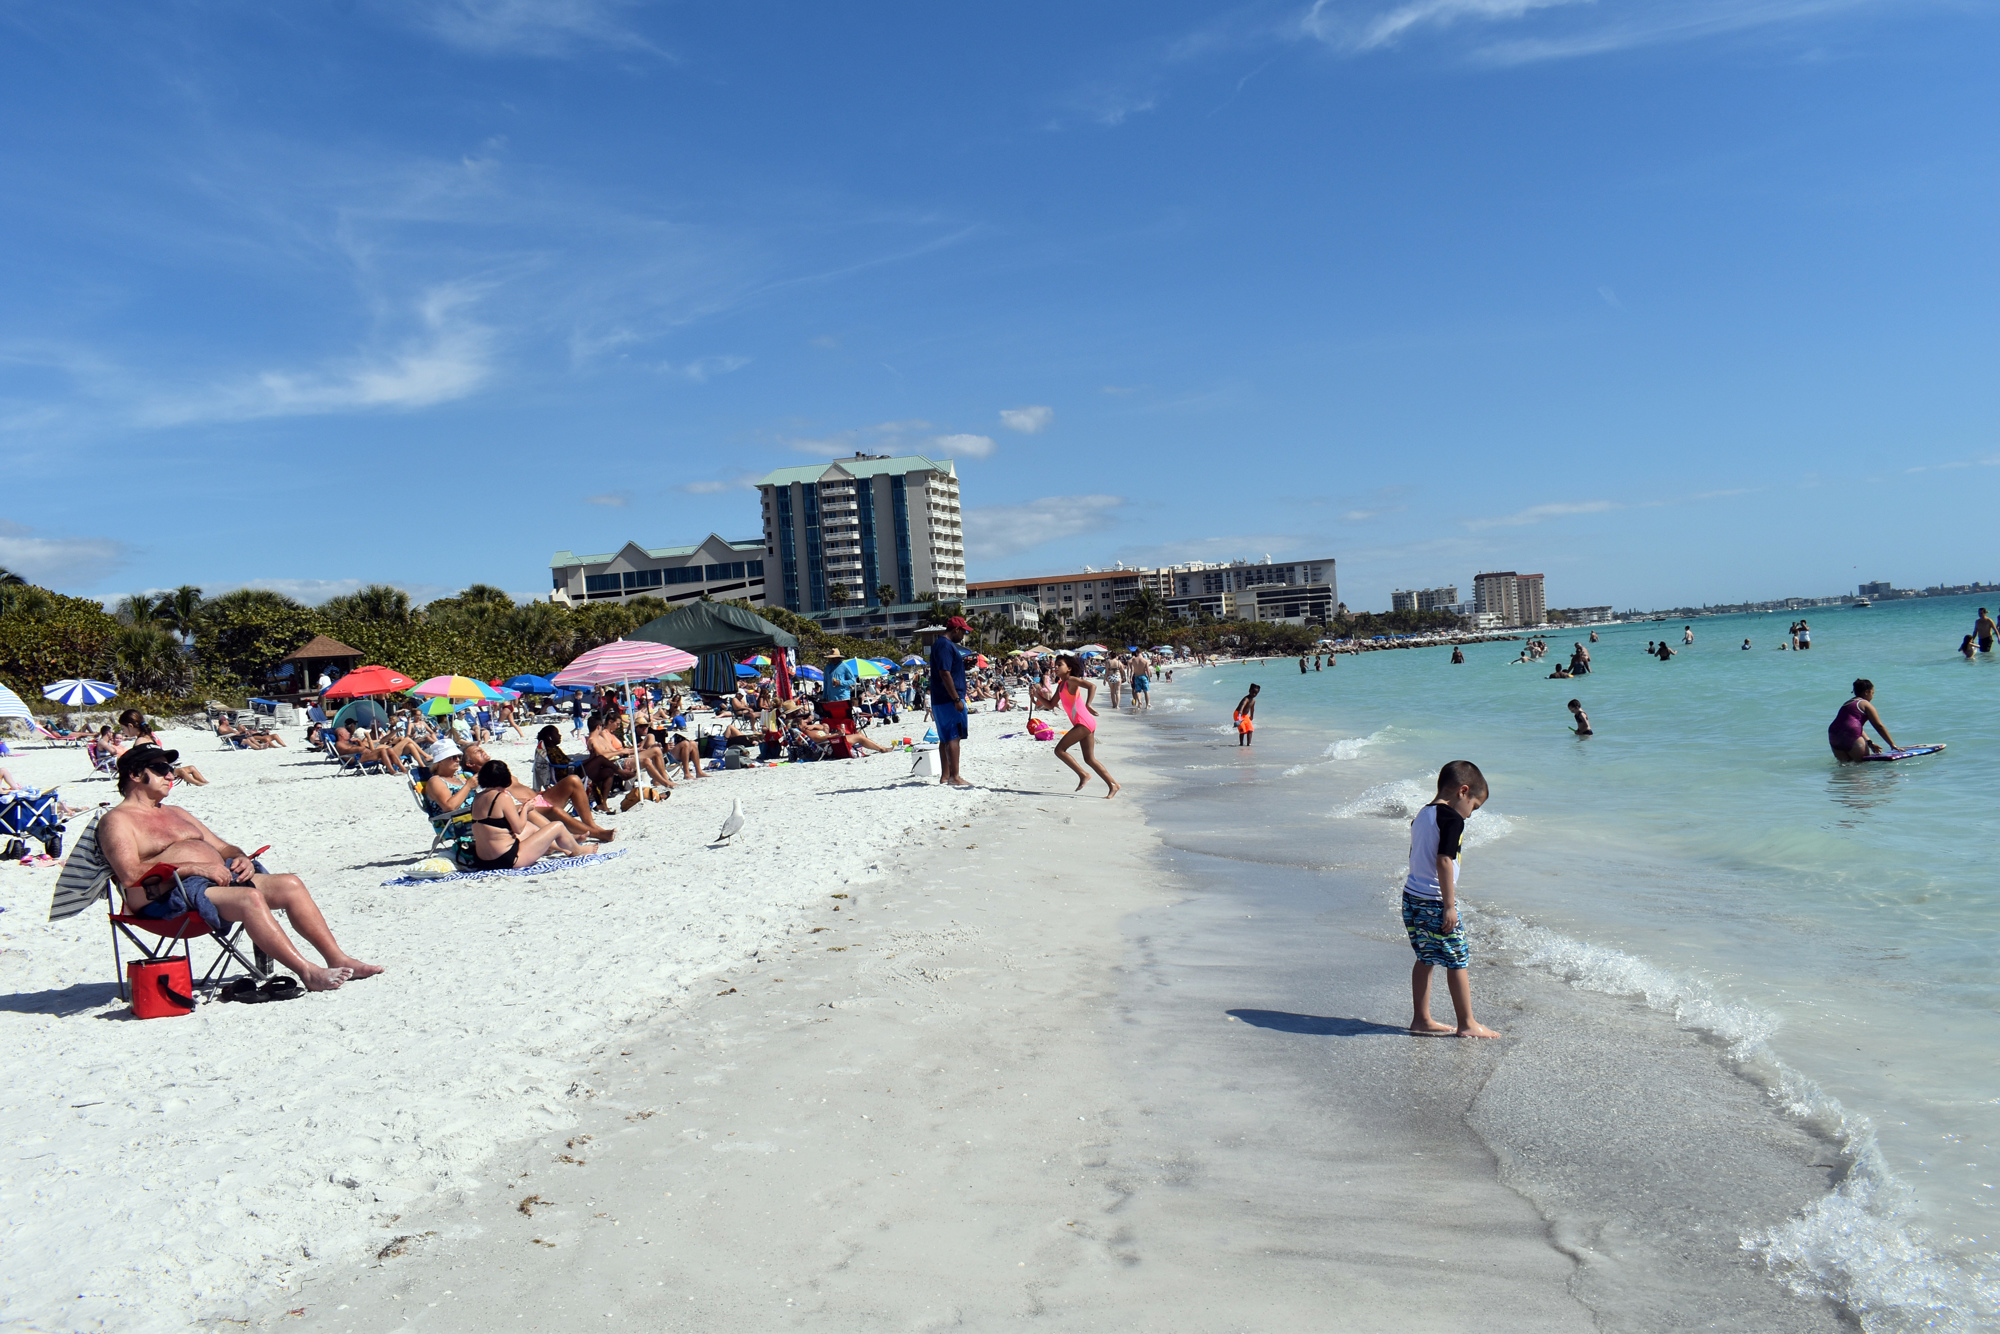 Before state guidelines on public gatherings on beaches were announced, Lido Beach well-attended.